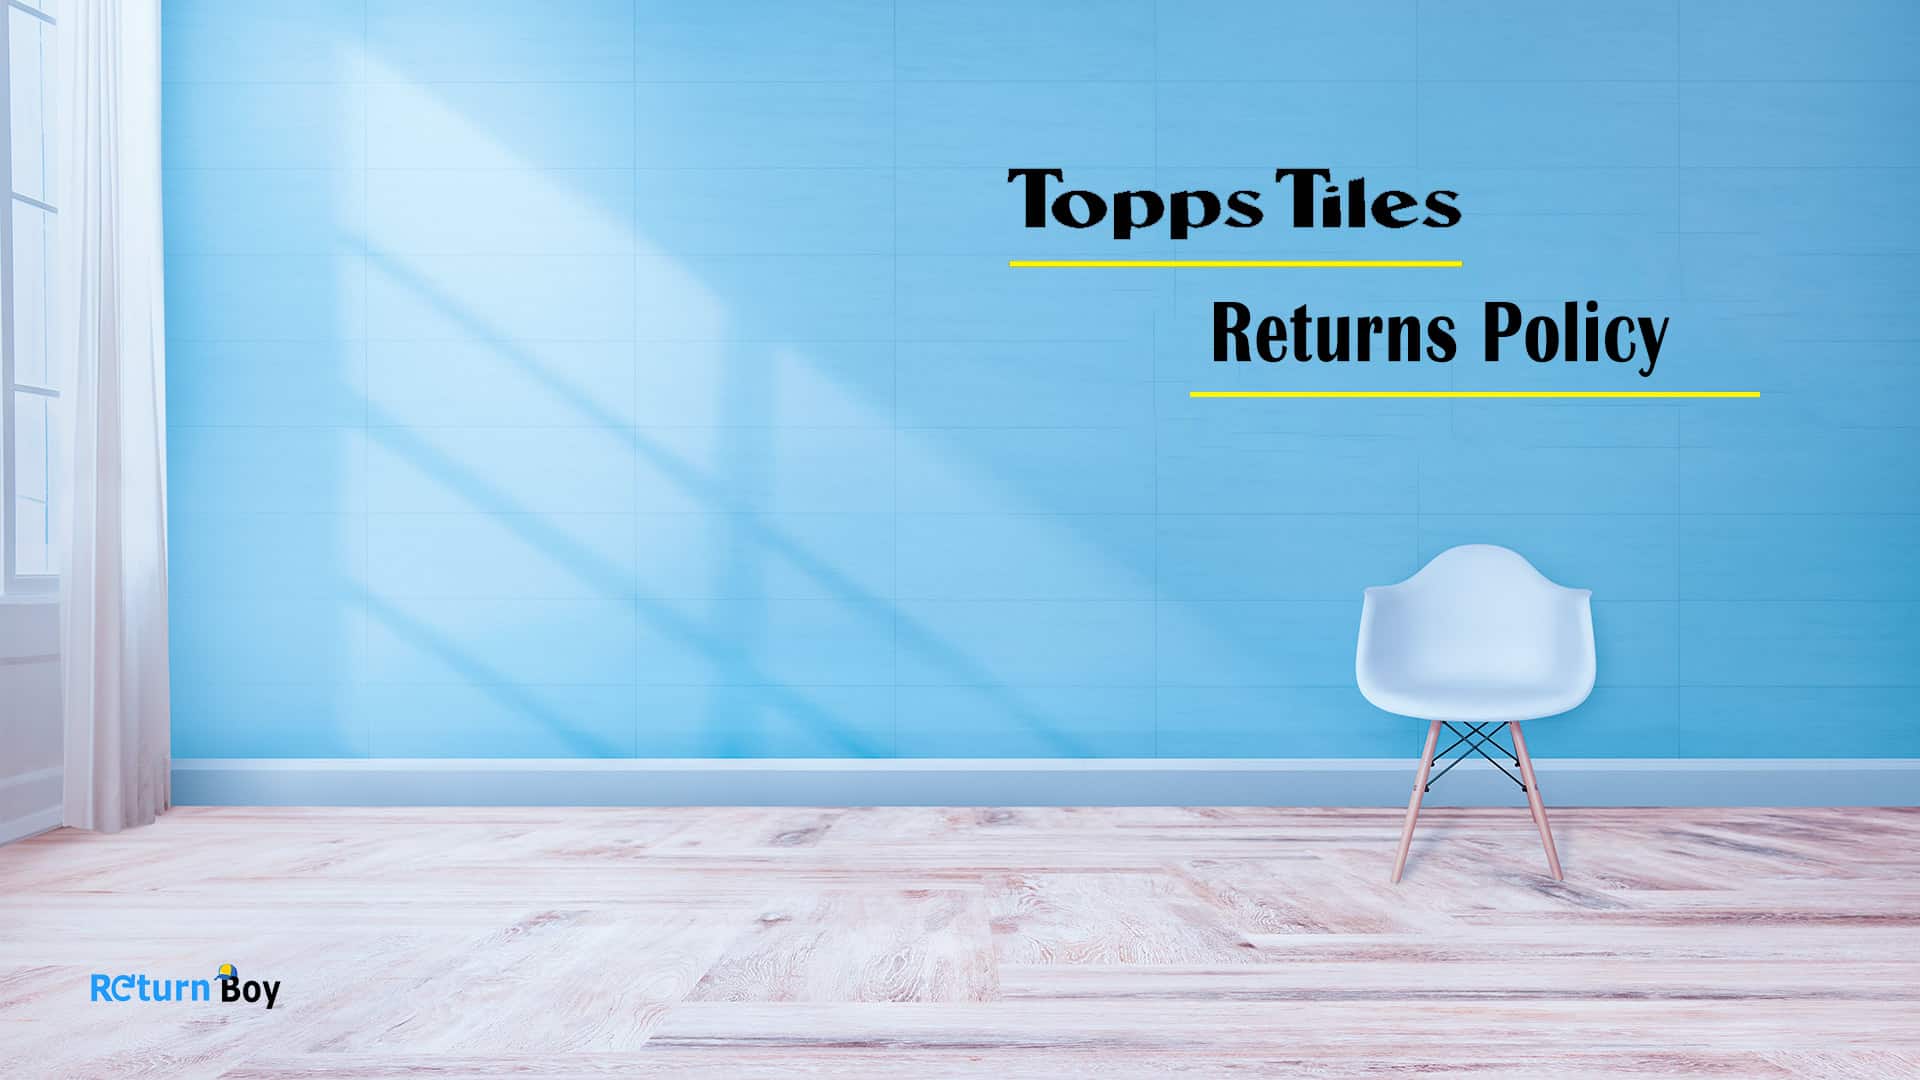 Topps Tiles Return Policy